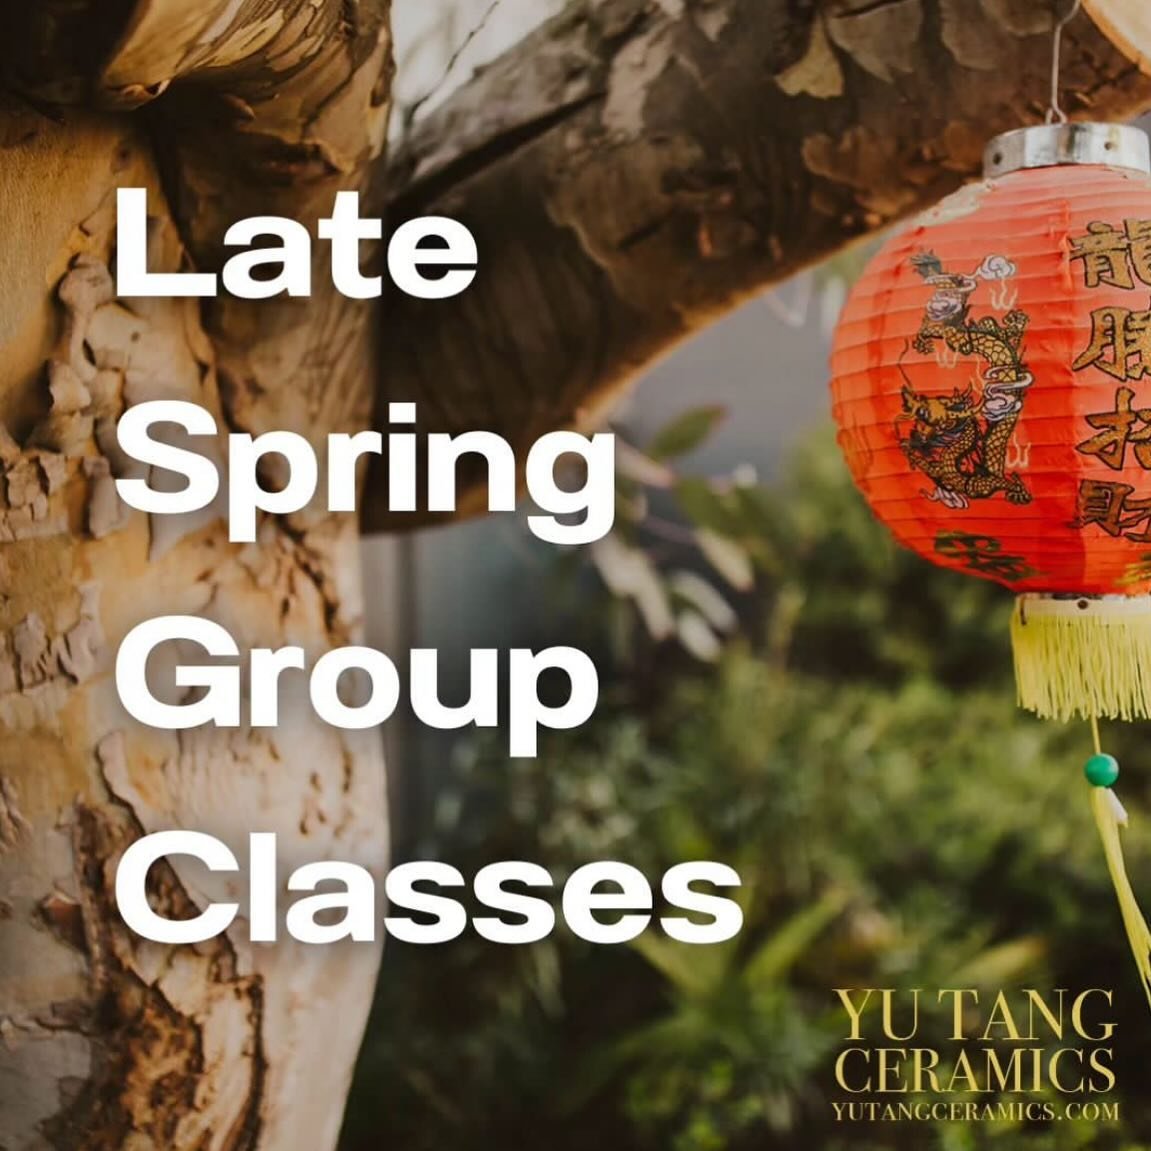 Registration OPEN NOW! 

Late spring group classes: May 13th - July 6th

✨️Beginner✨️
- Tuesdays: May 14th - July 2nd, 6:30-9pm
- Wednesdays: May 15th - July 3rd, 6:30-9pm
- Thursdays: May 16th - July 4th, 6:30-9pm
- Saturdays: May 18th - July 6th, 1